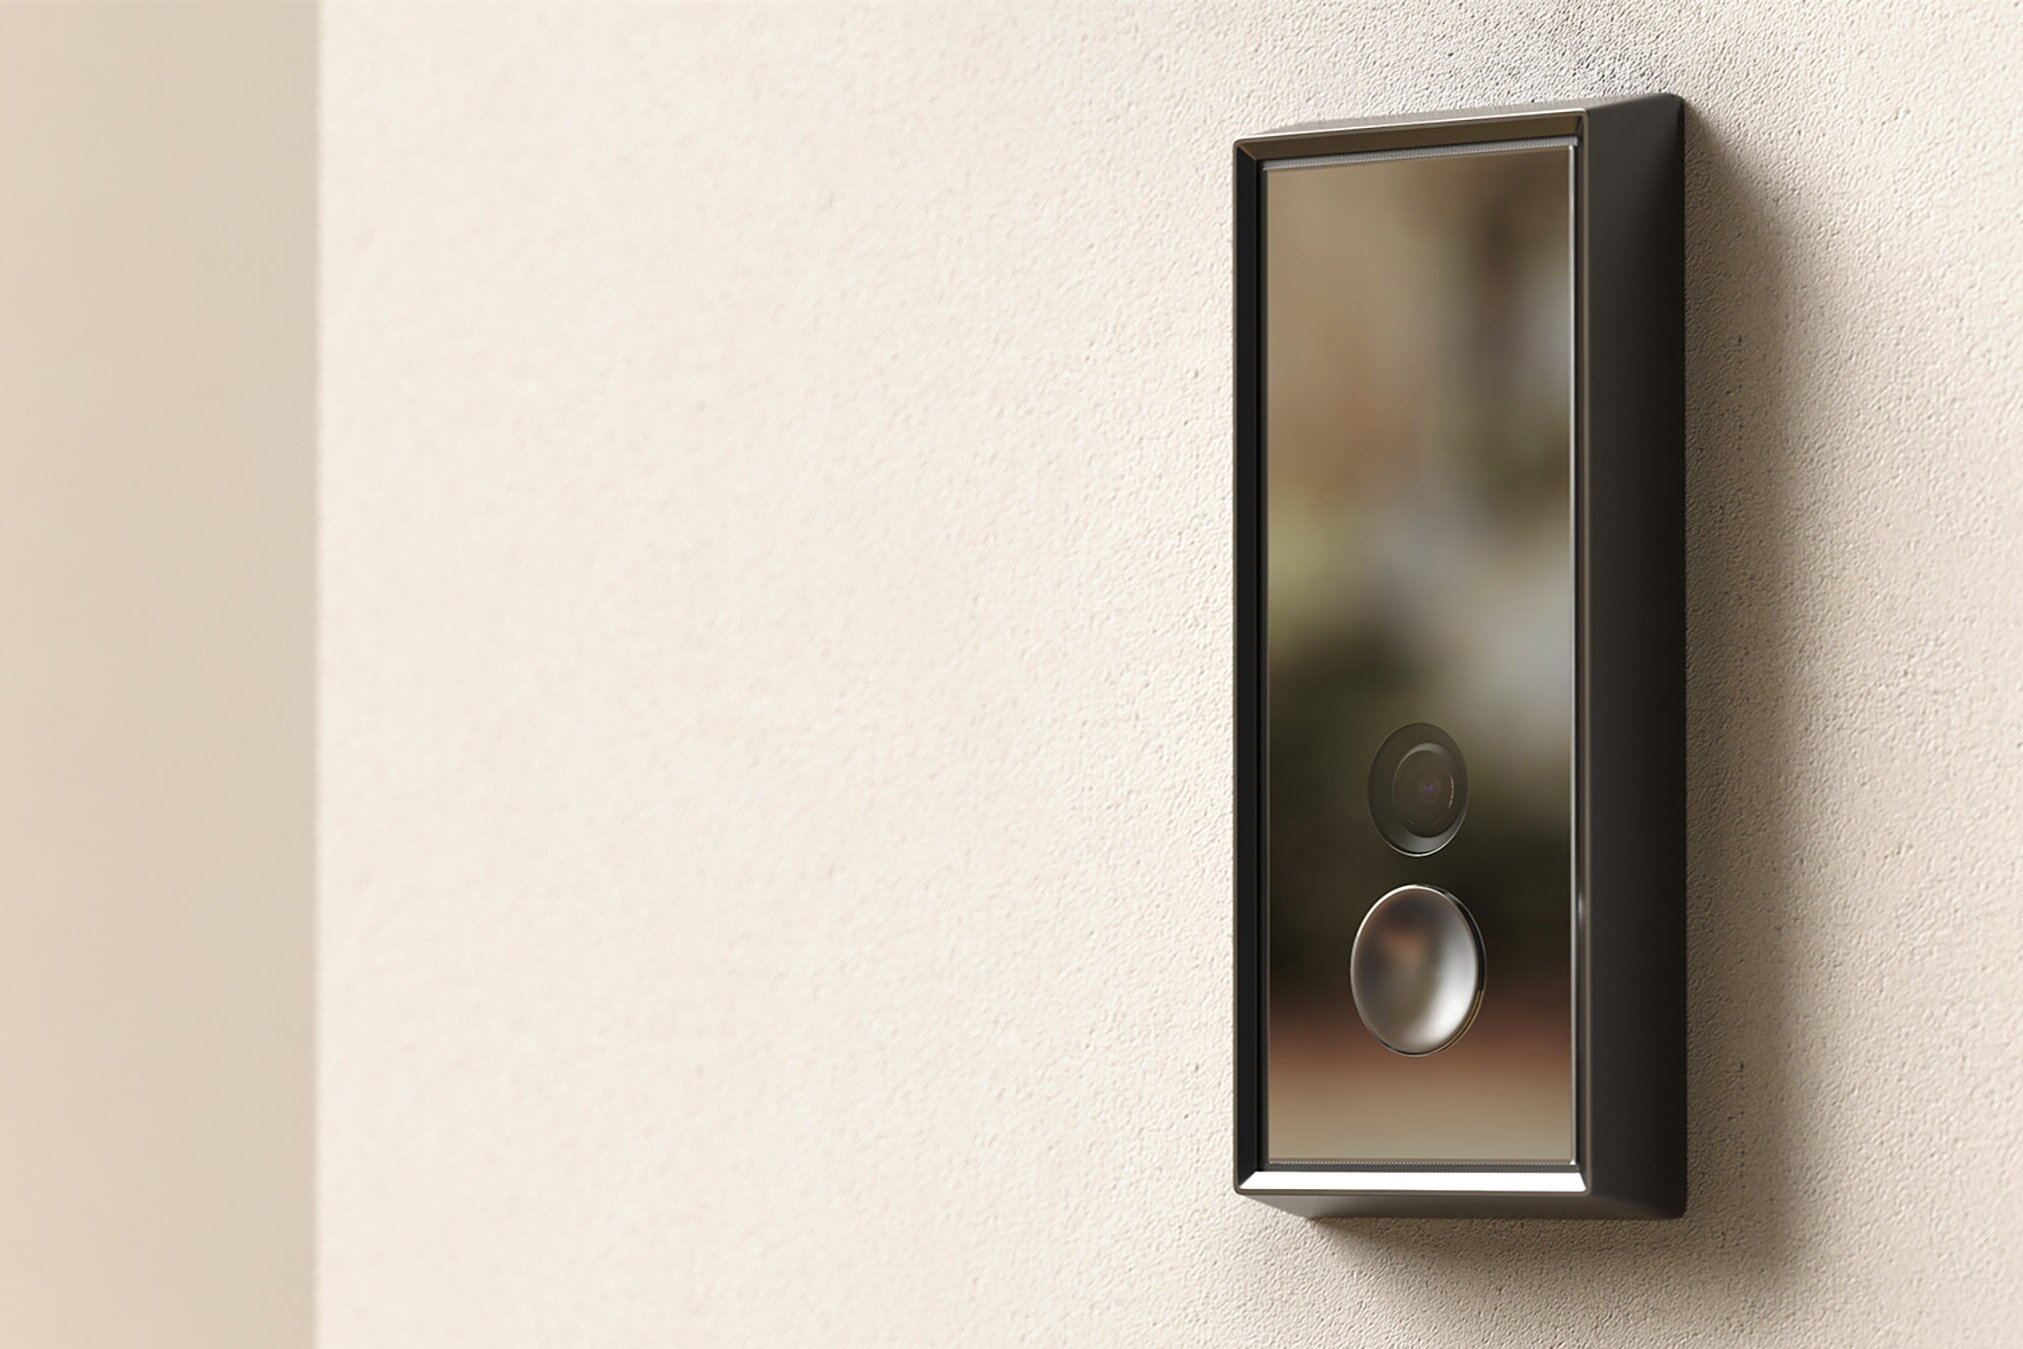  Warm Welcome, a friendlier smart doorbell *Photo provided by Hannah Fink for Industrial Craft. 